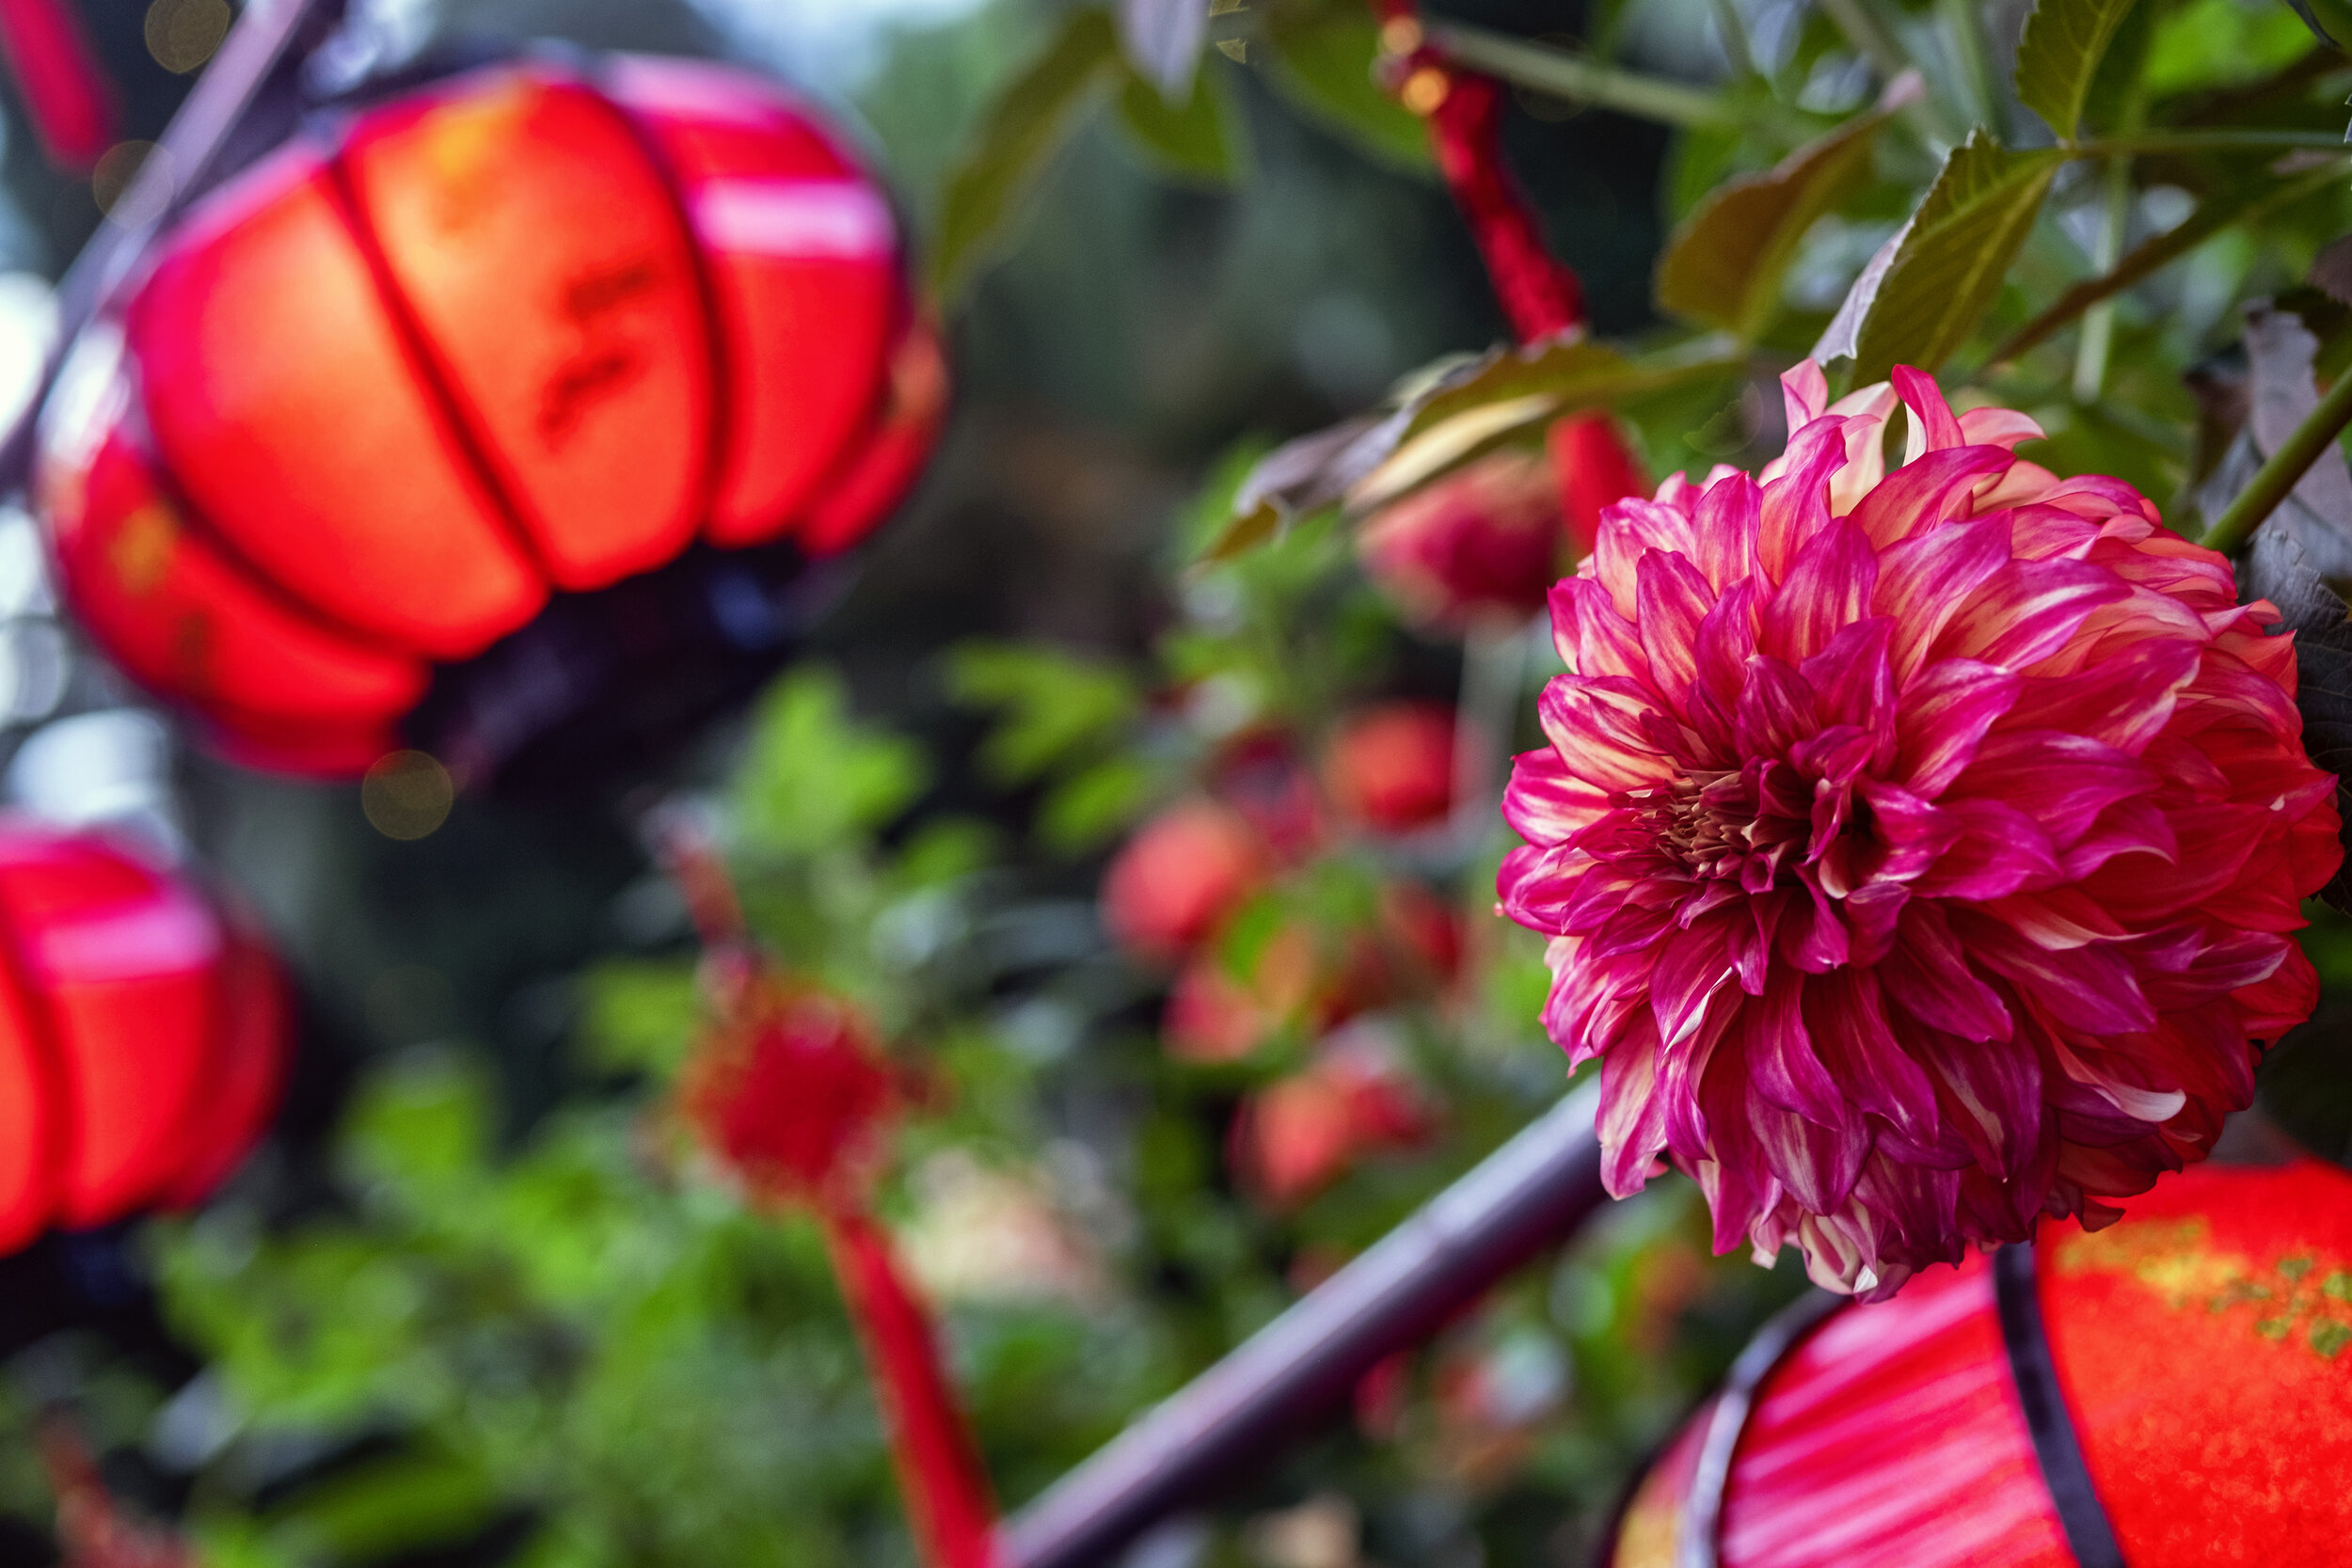  A dahlia is seen amid lanterns during the annual Dahlia Dreams floral display ahead of the Chinese Lunar New Year of the Ox, otherwise known as the Spring Festival, at Singapore's Gardens by the Bay, January 31, 2021. REUTERS/Loriene Perera 